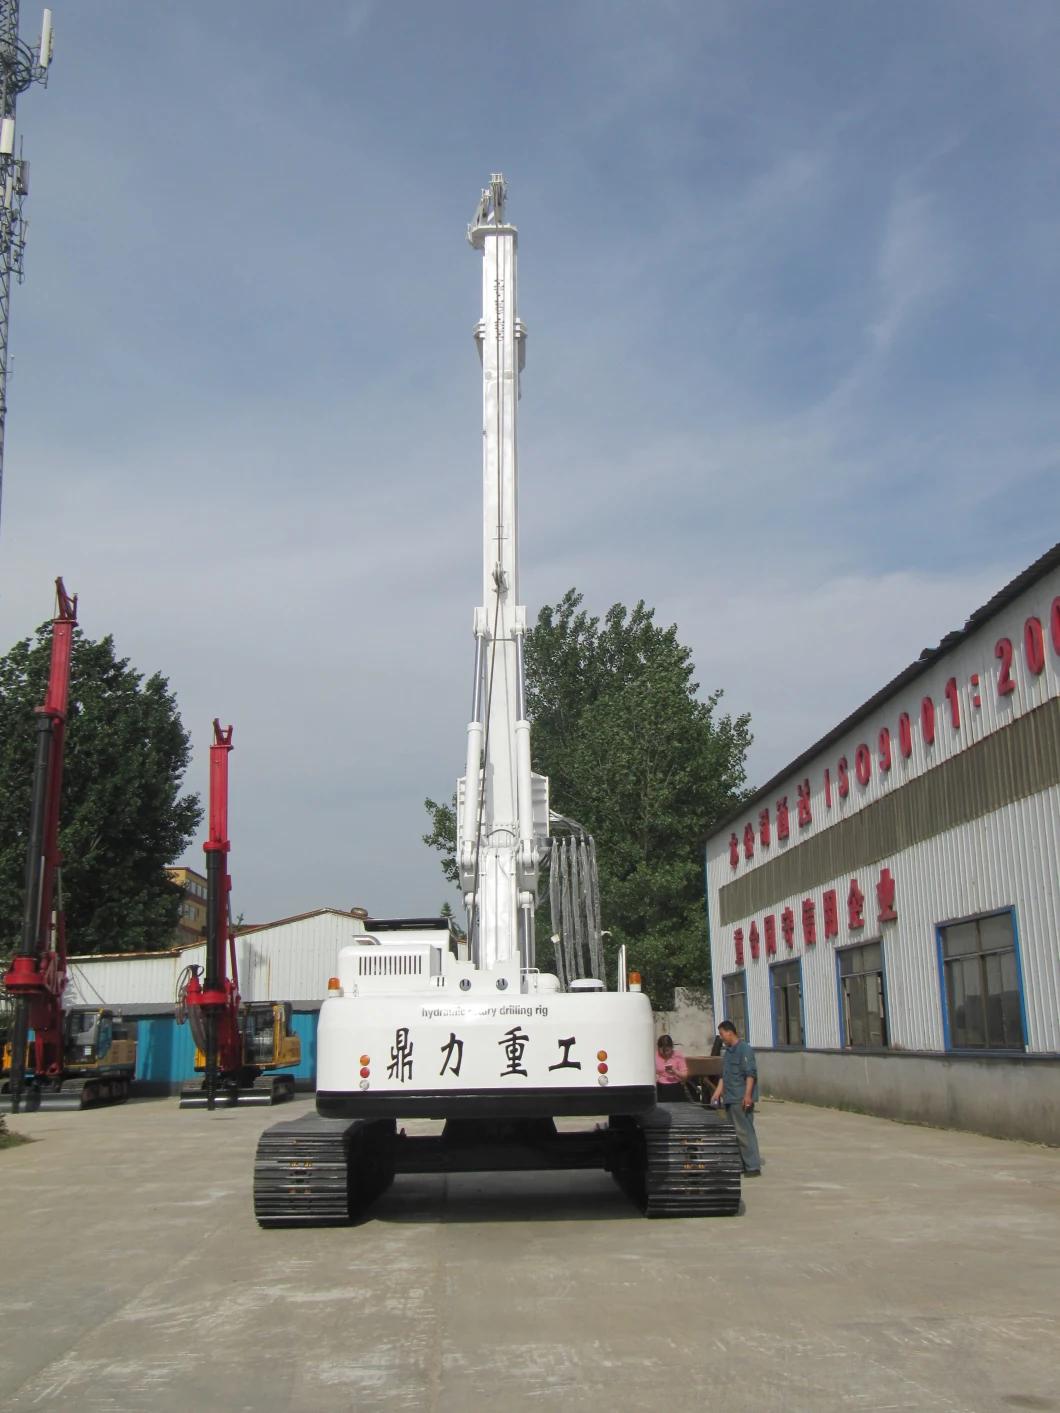 5-10m Rotary Drilling Rig Machine Dr-100 Mini Piling Rig for Sale